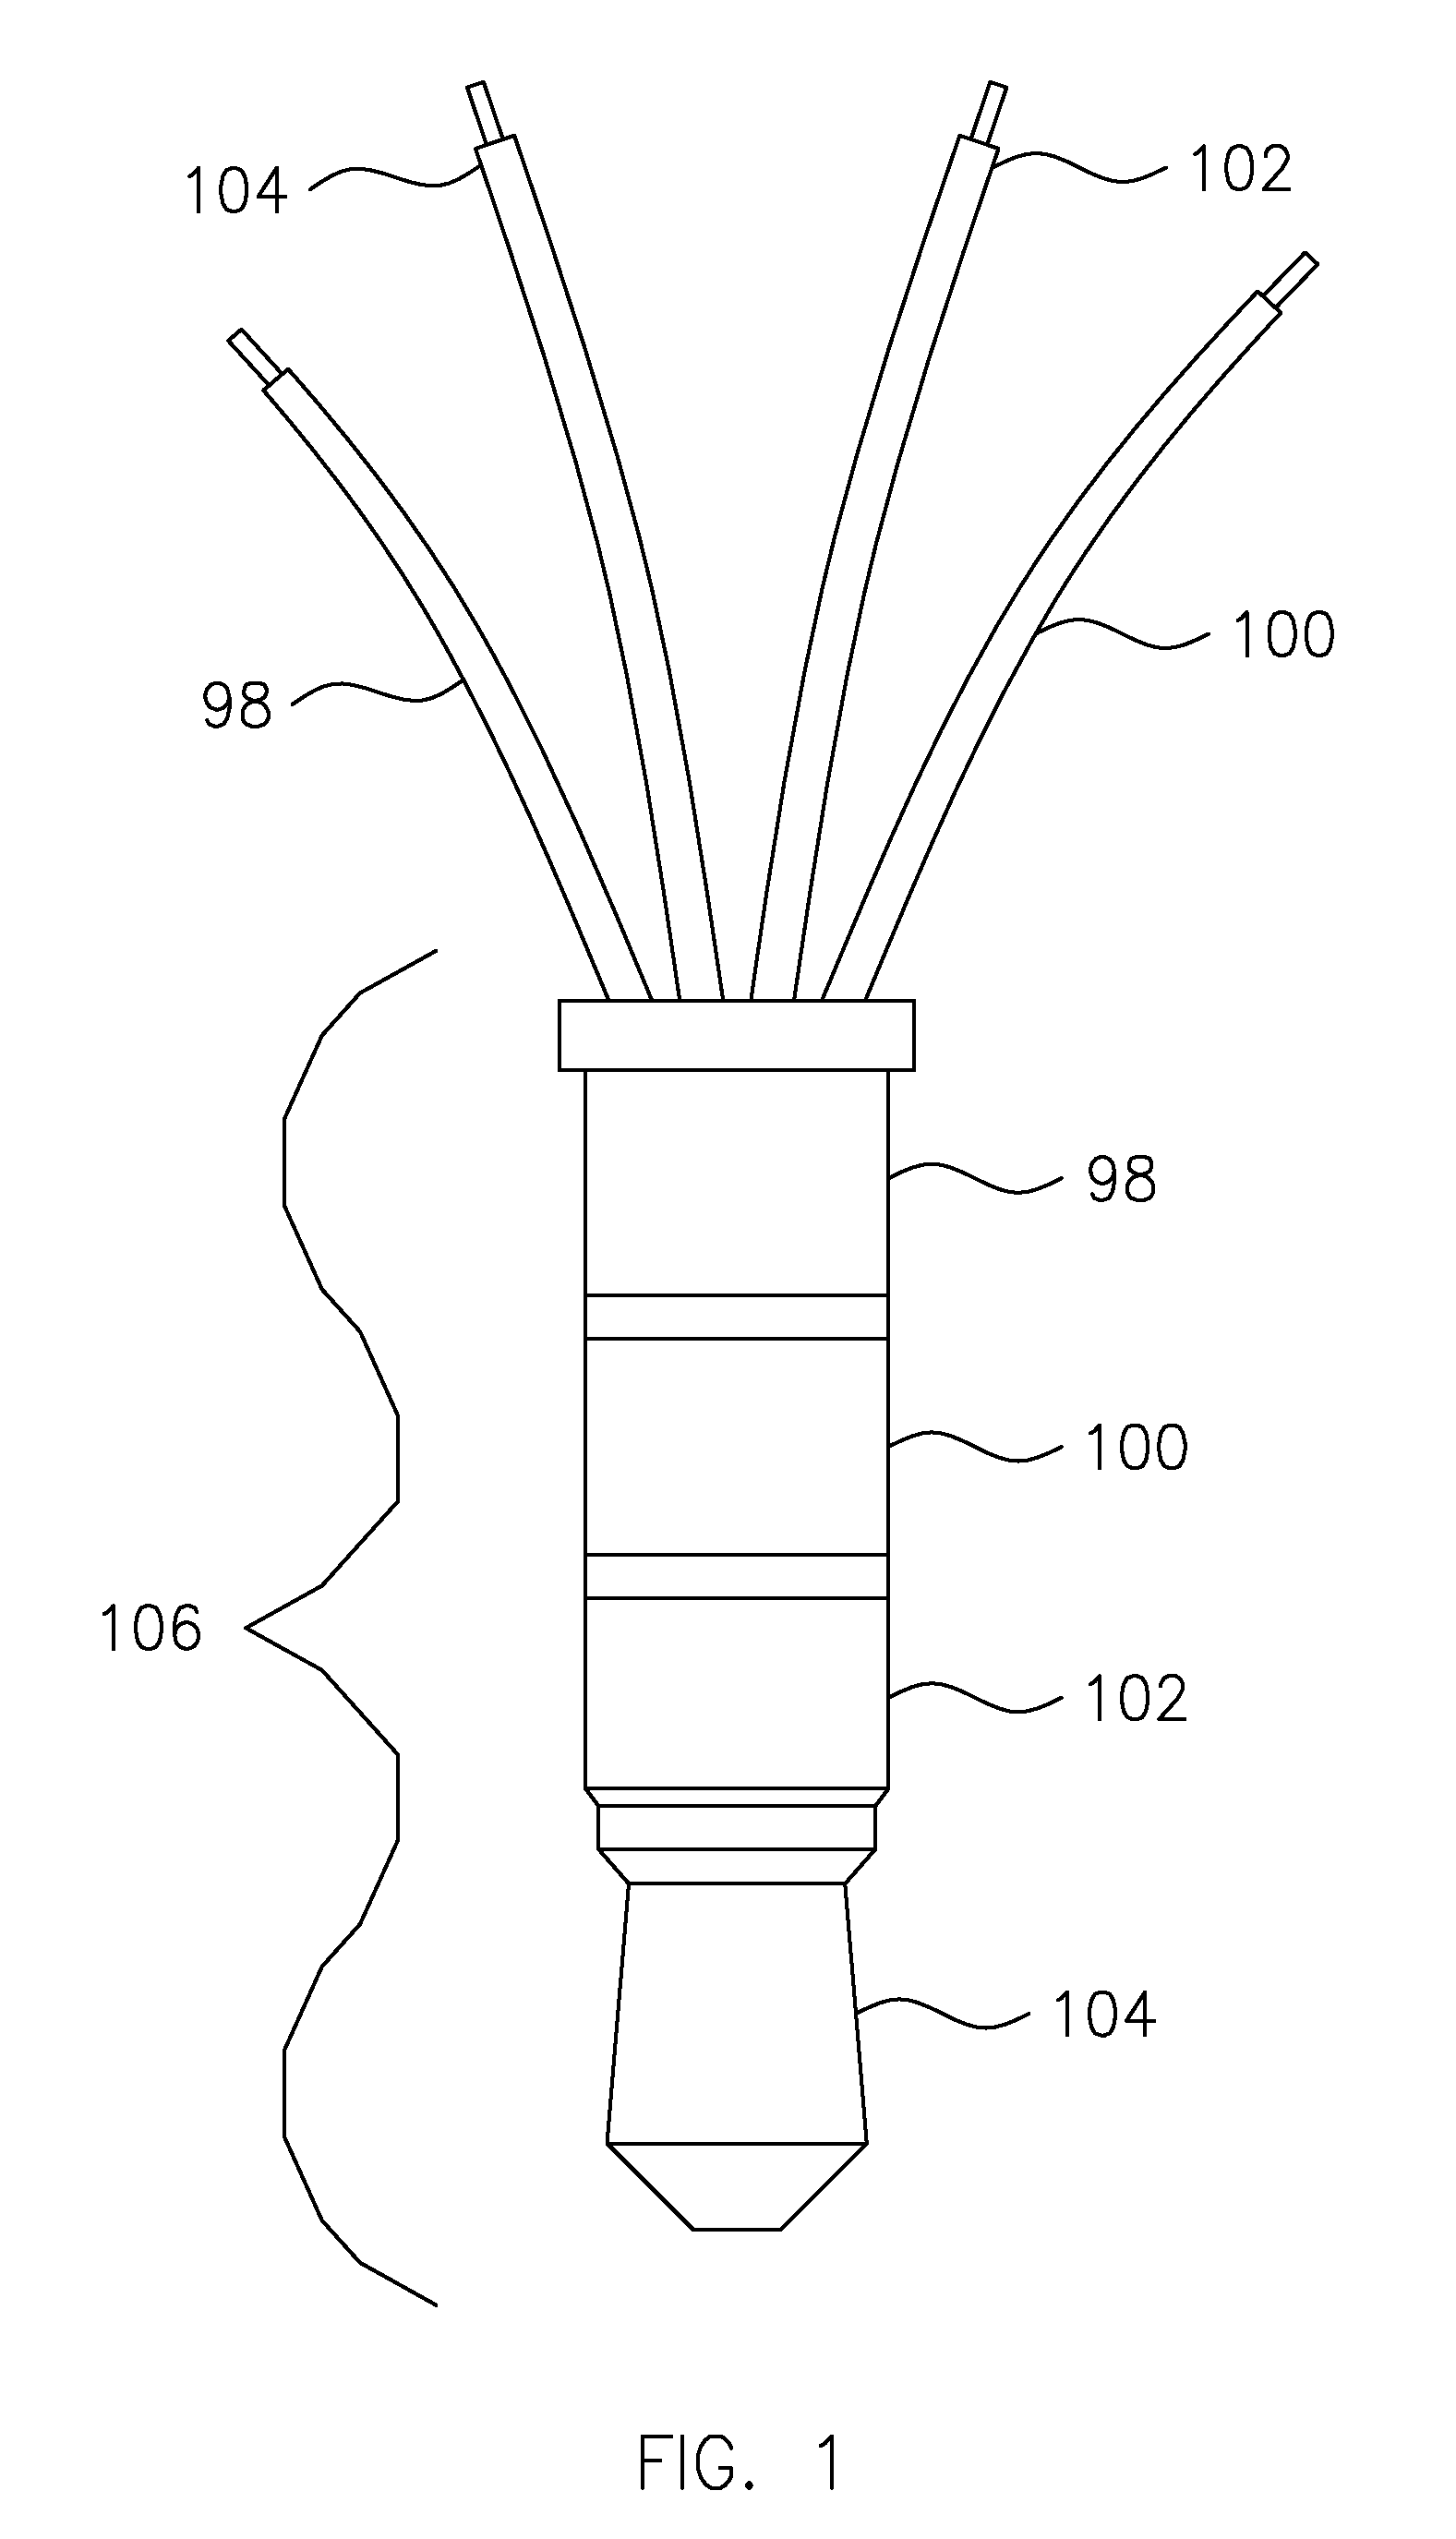 Audio port communication and power device